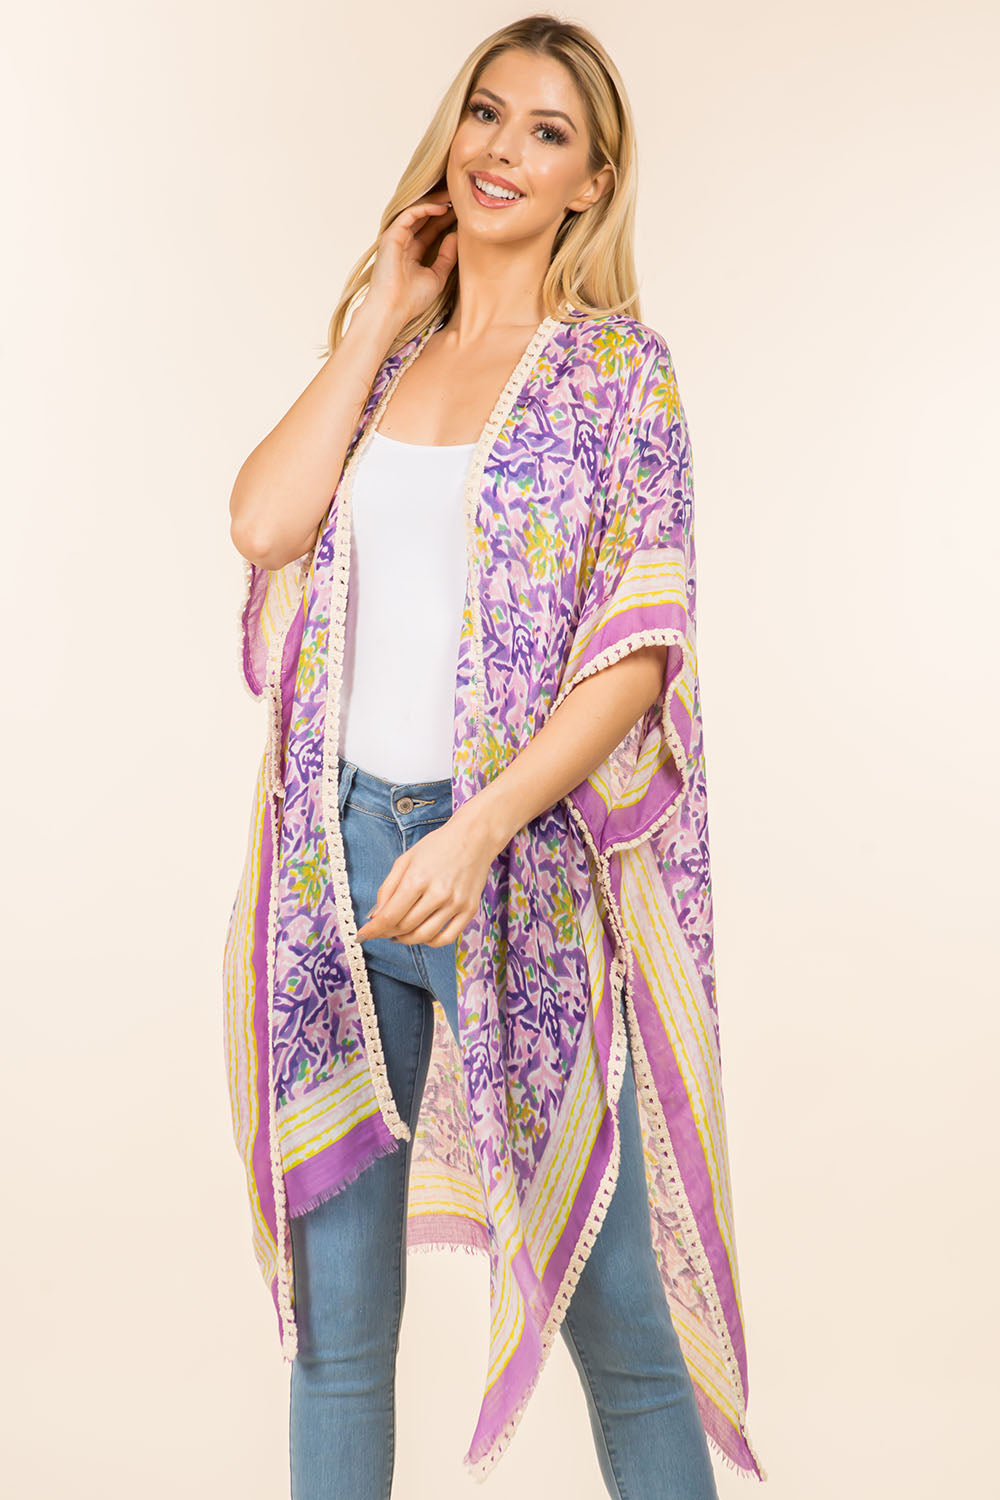 KP-4007 floral kimono with tassels